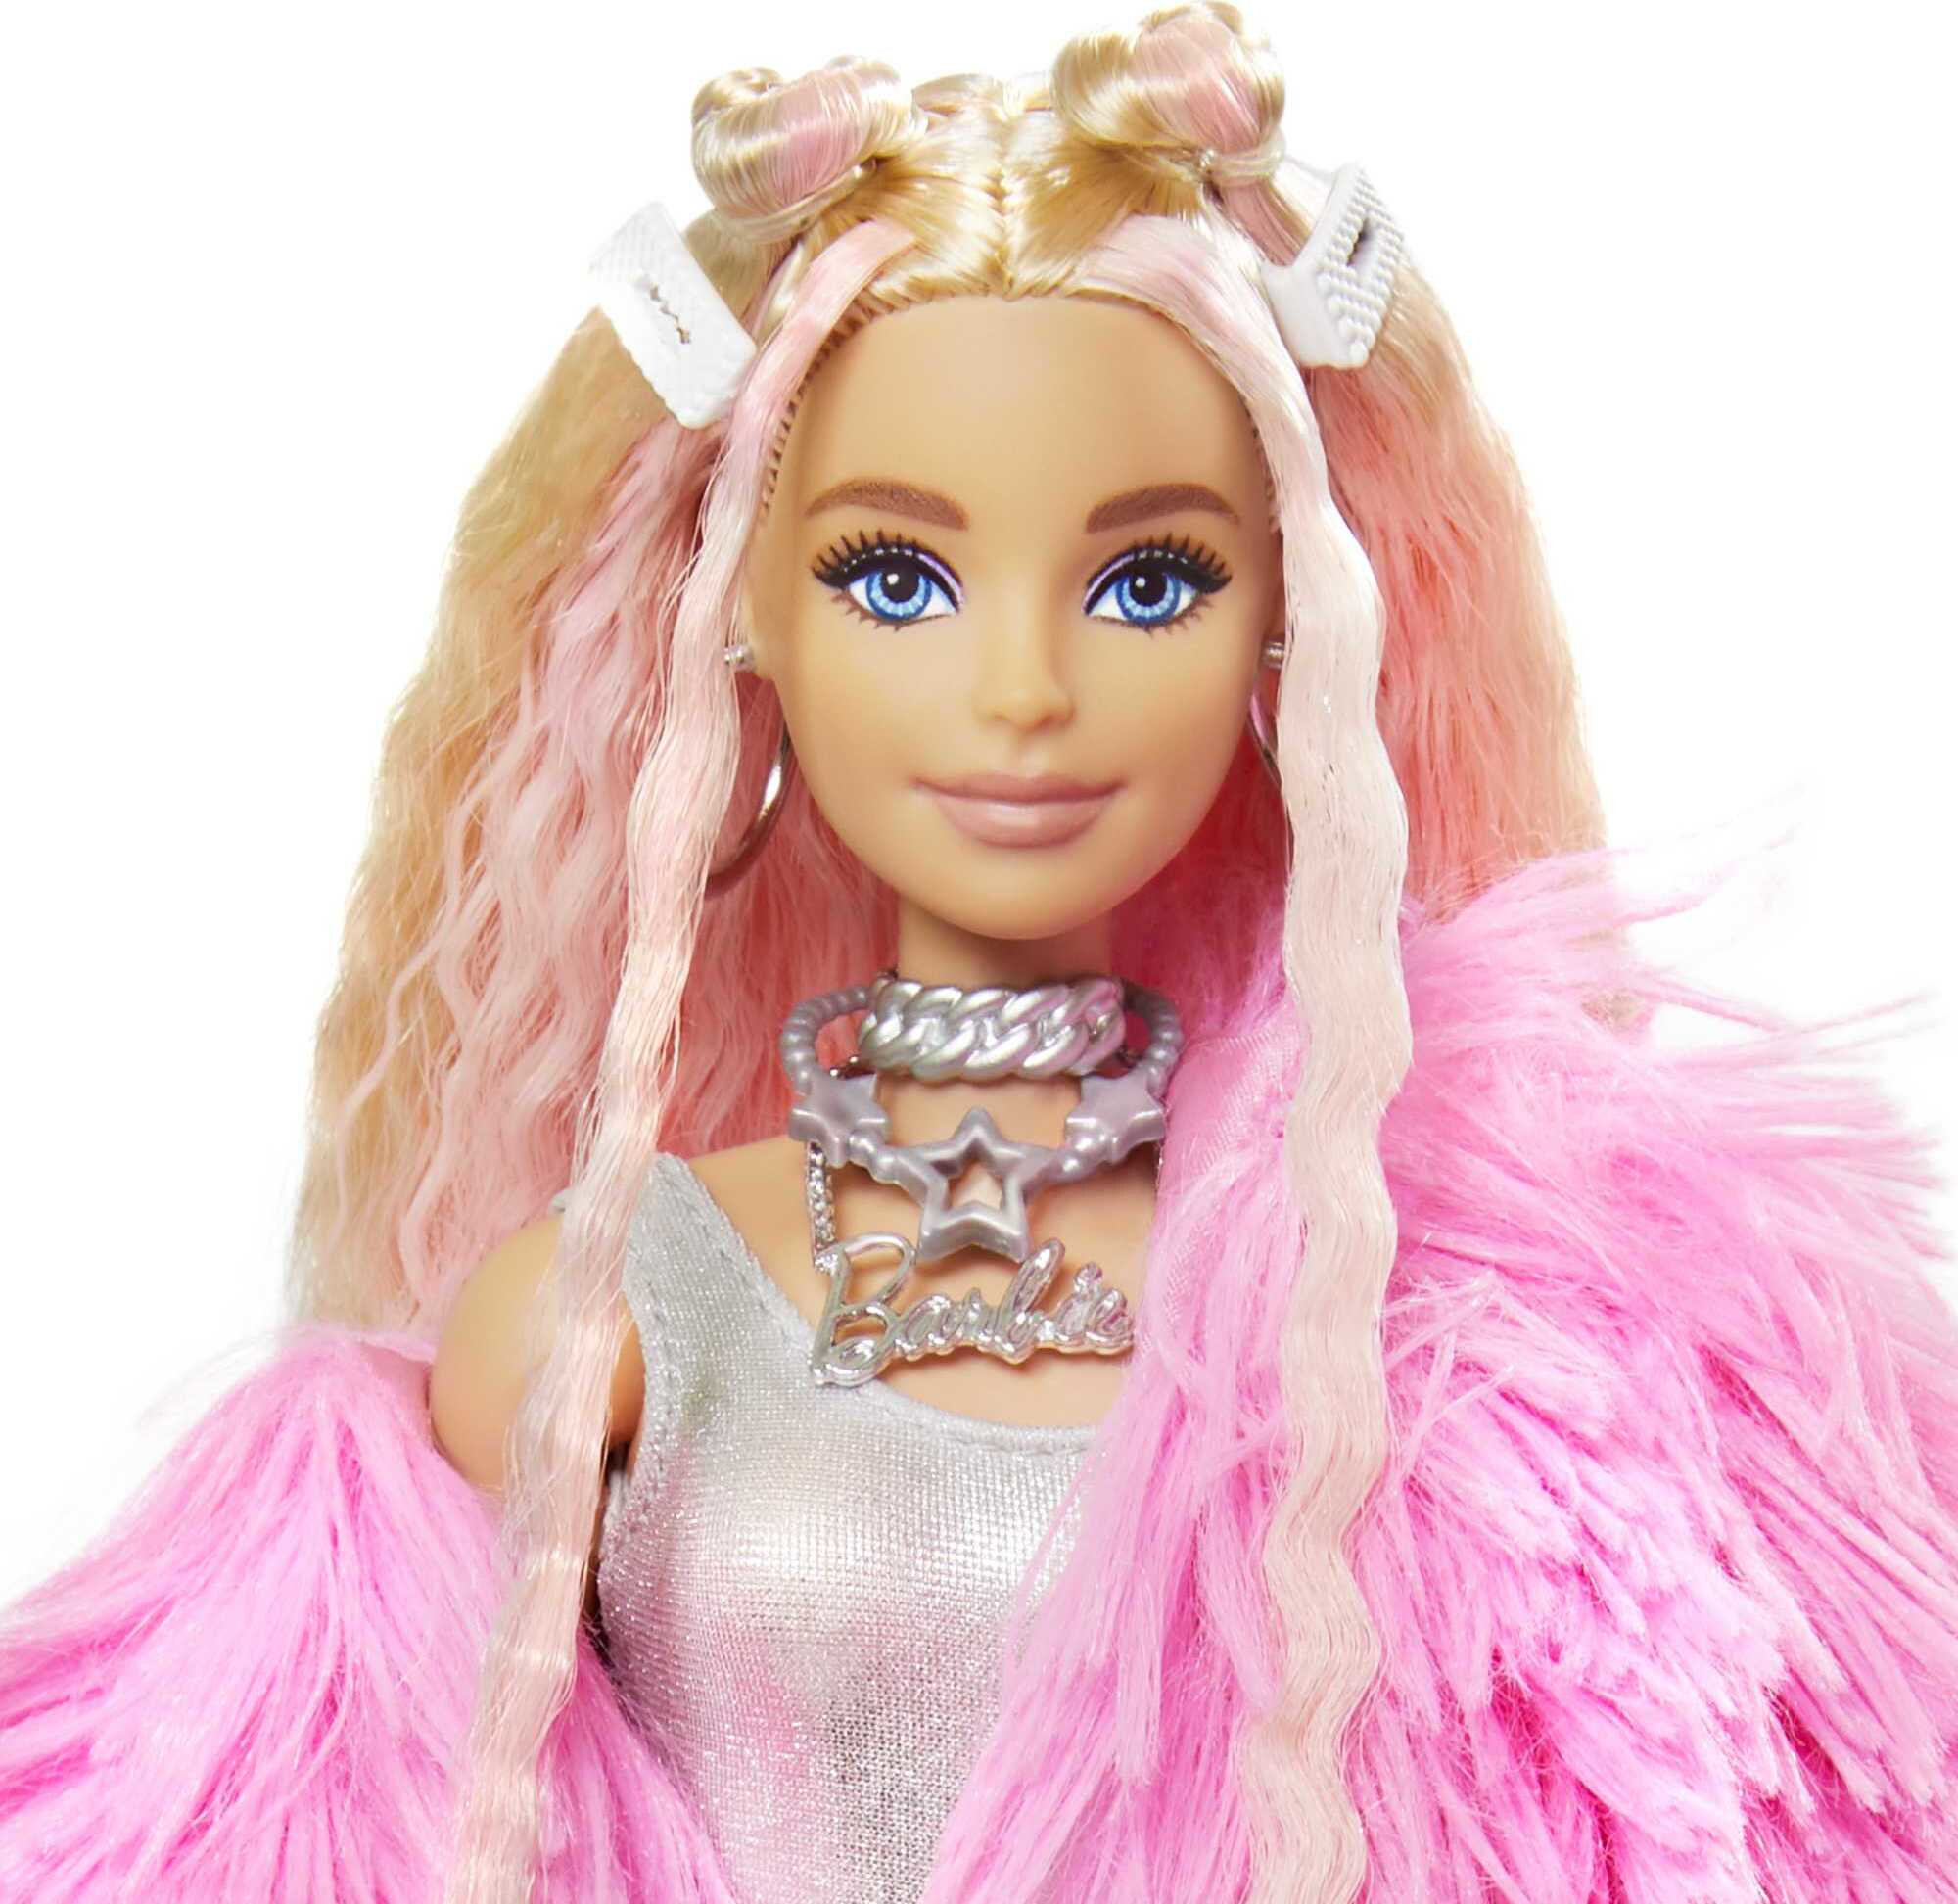 Barbie Extra Fashion Doll with Crimped Hair in Fluffy Pink Coat with Accessories & Pet - image 6 of 7